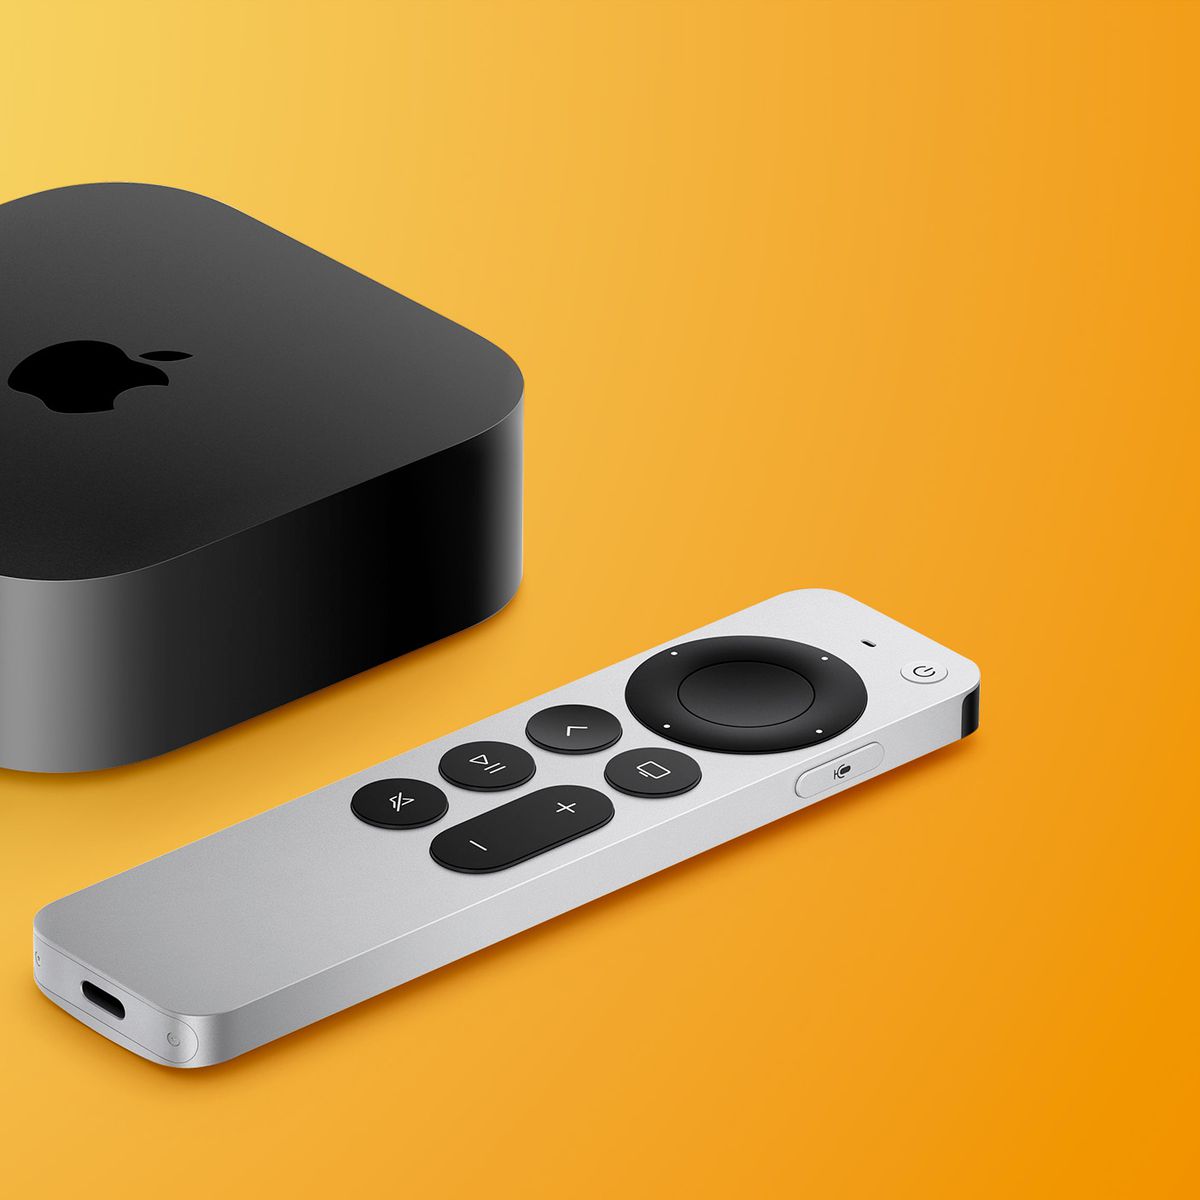 Chip Transistor Mezclado Apple TV: Just Updated with A15 Chip and Cheaper Price